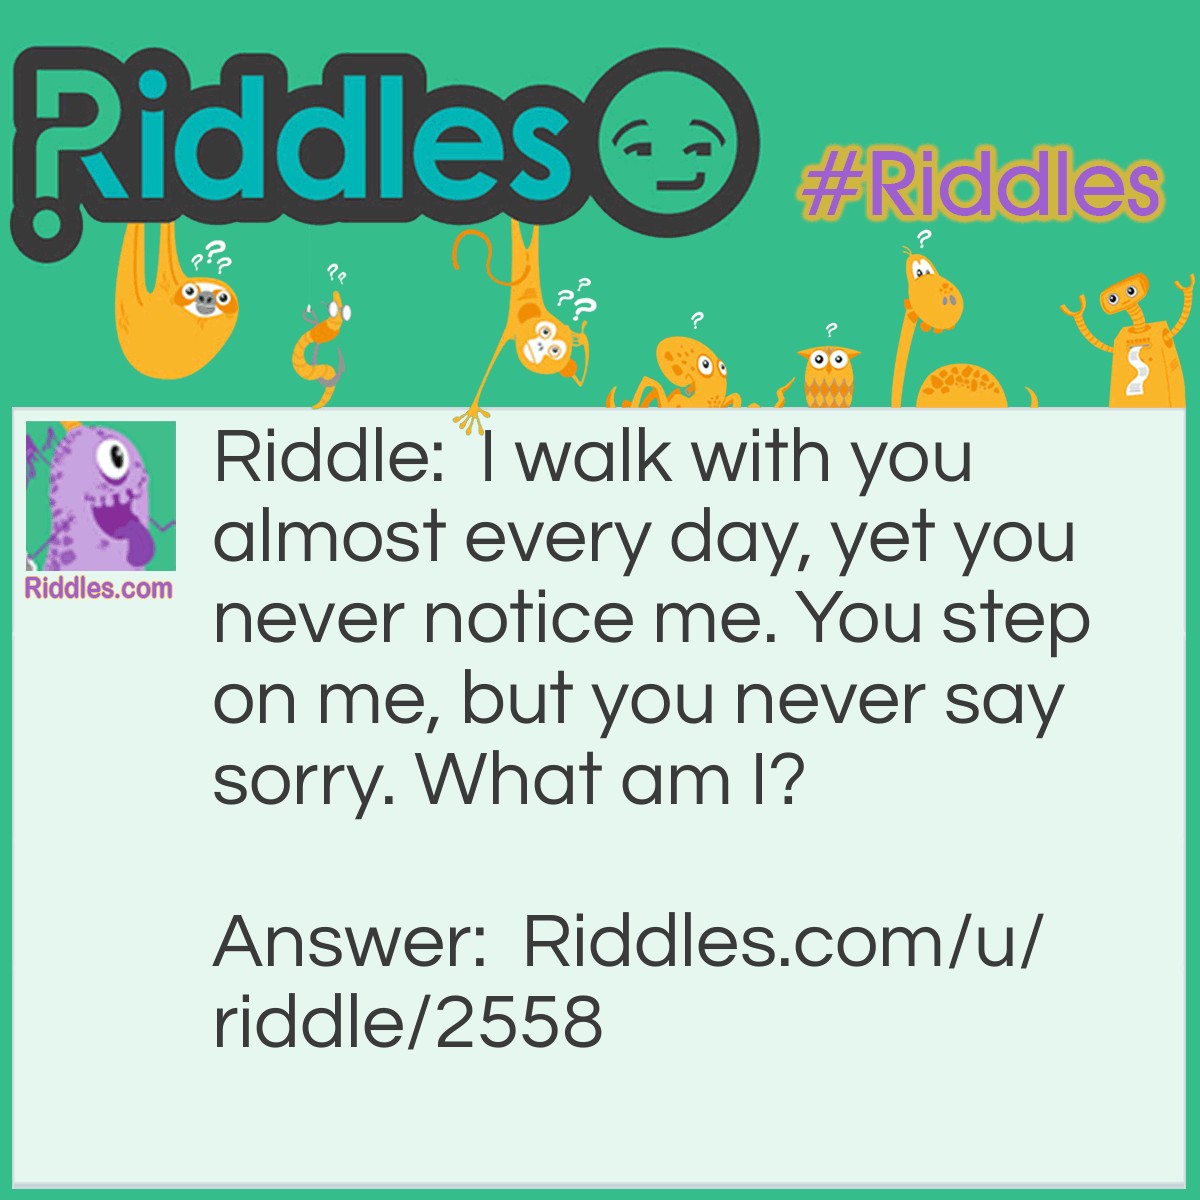 Riddle: I walk with you almost every day, yet you never notice me. You step on me, but you never say sorry. What am I? Answer: Your shoes.